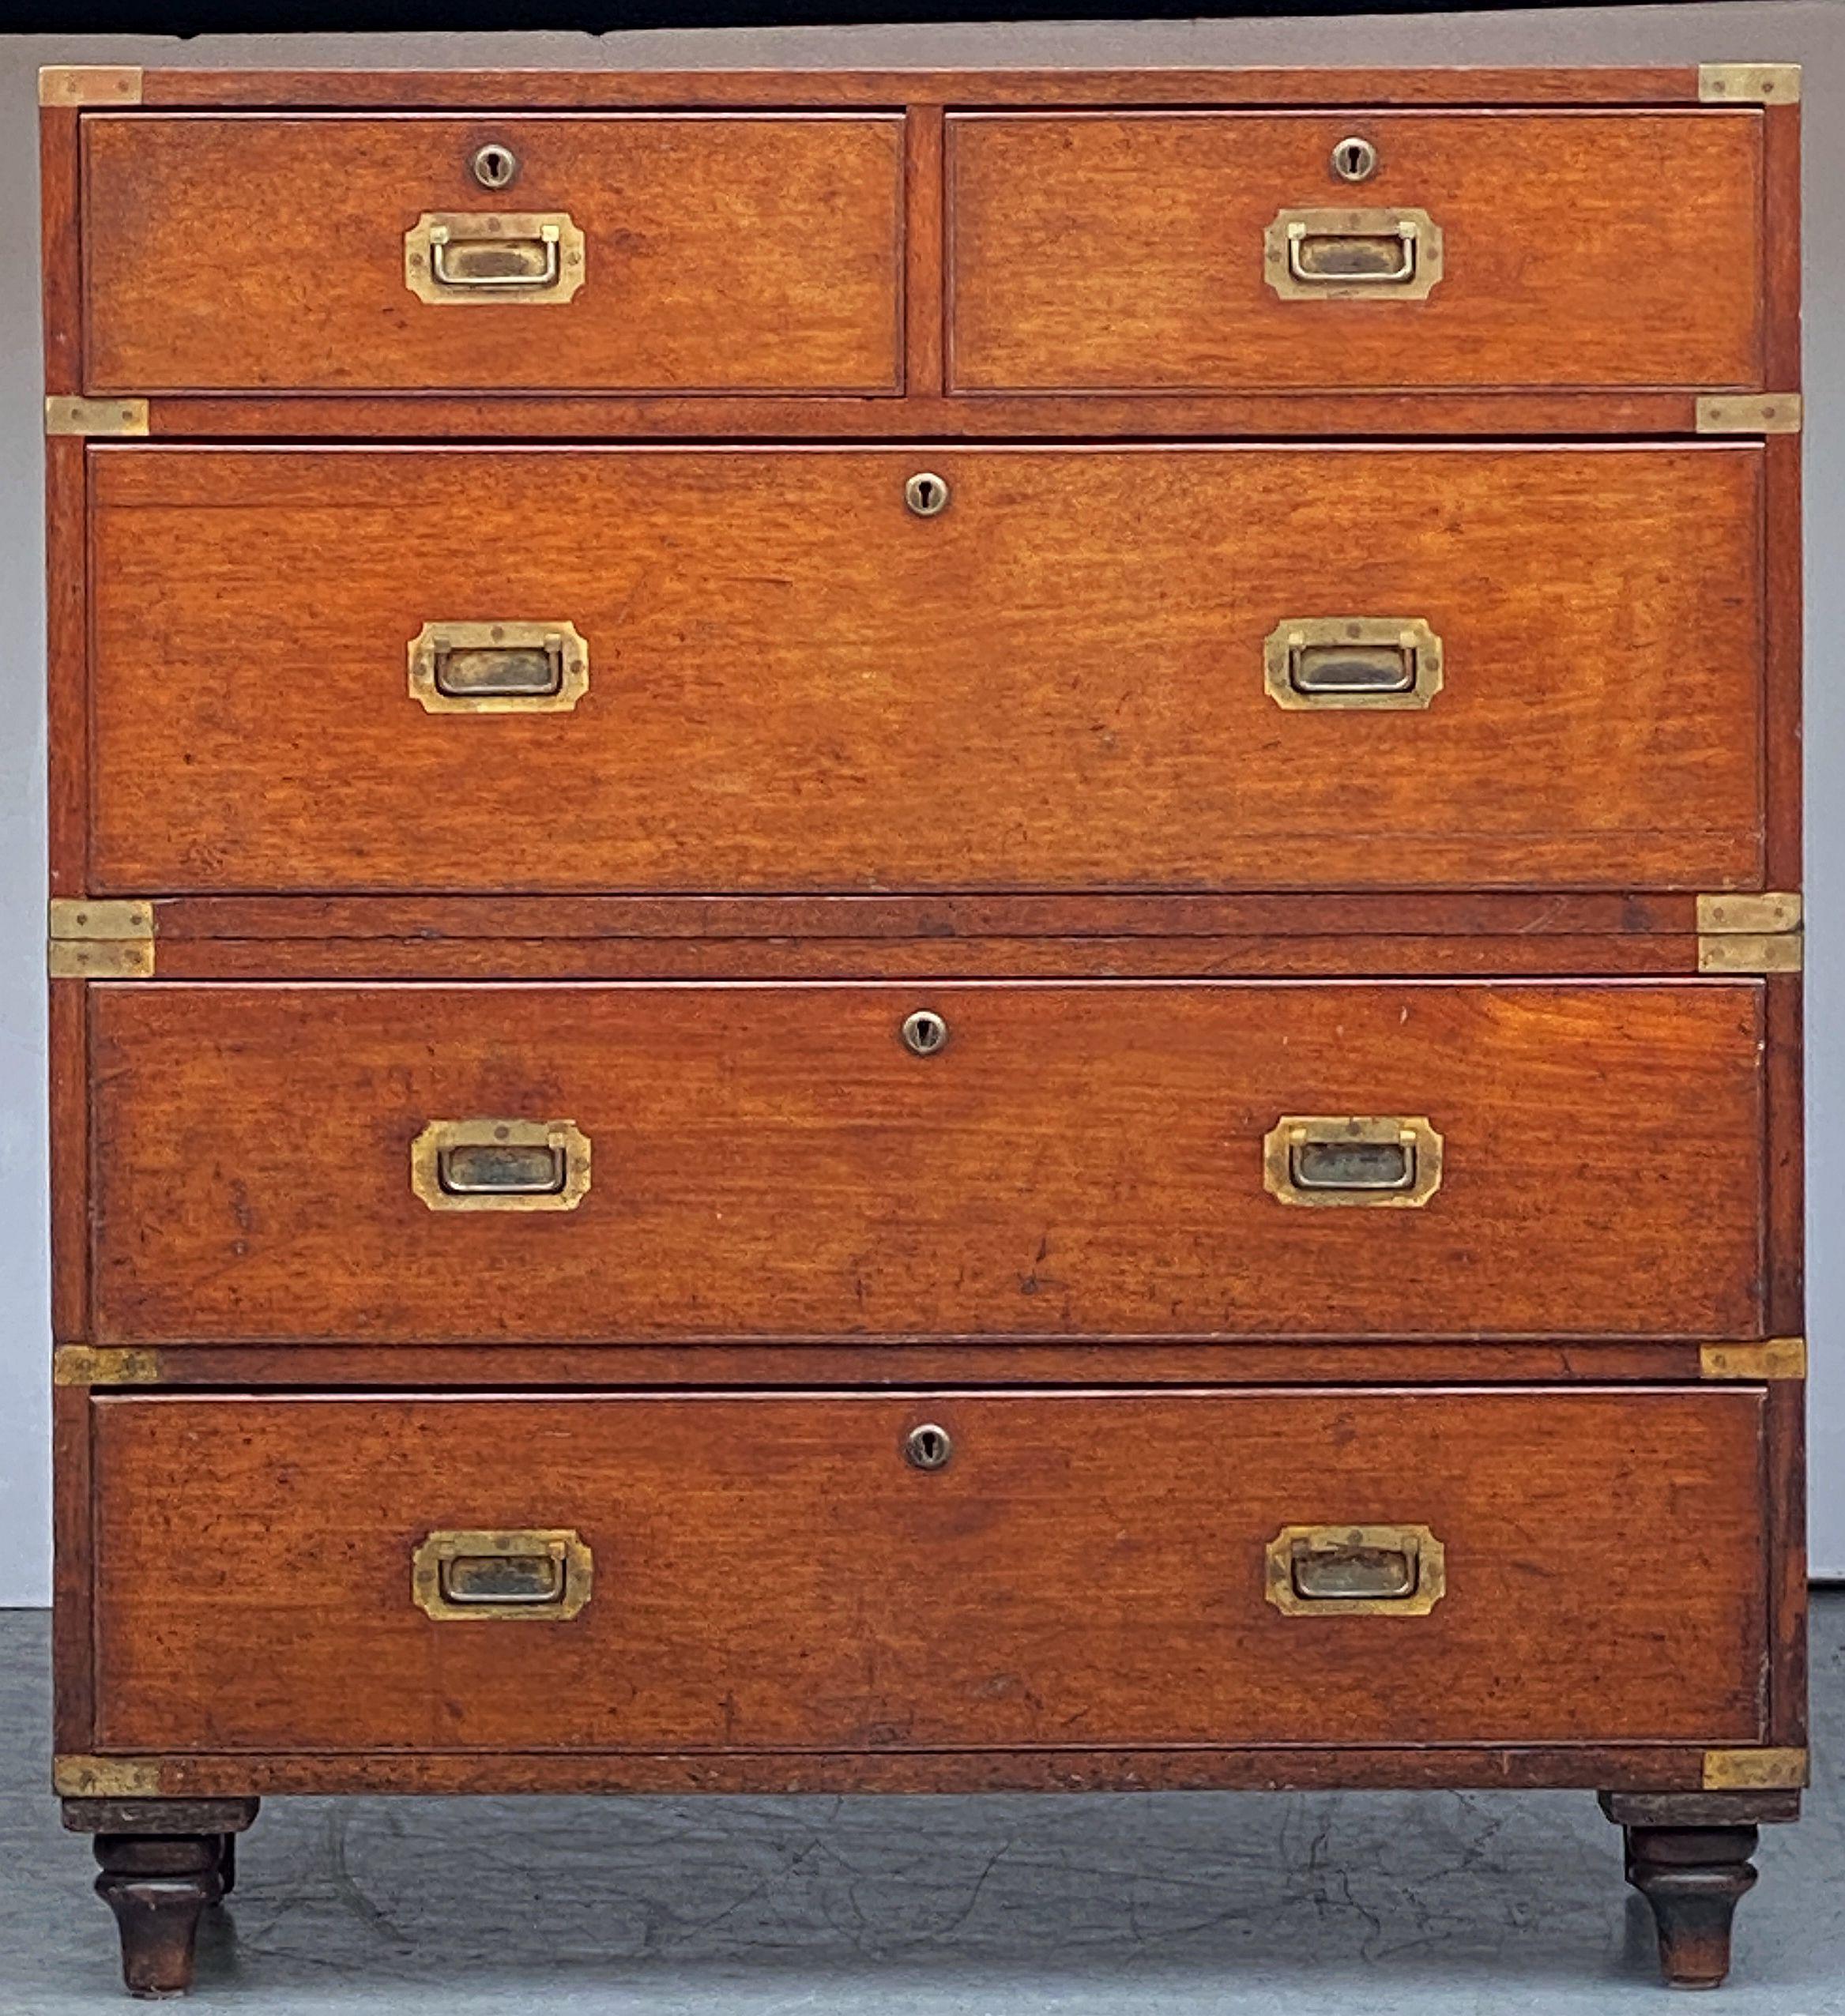 A handsome British military officer’s Campaign Ware chest of drawers or dresser, from the 19th century, featuring a patinated mahogany exterior with two short drawers over three long drawers, with brass escutcheons and recessed pulls. The